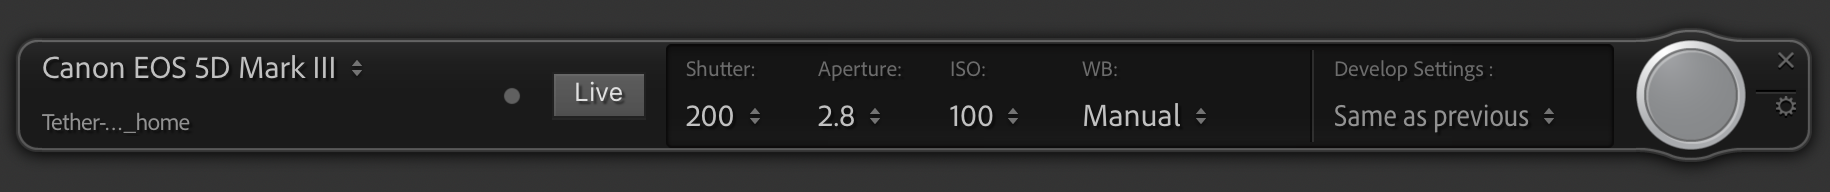 Lightroom Classic floating settings field for live tethered shooting.